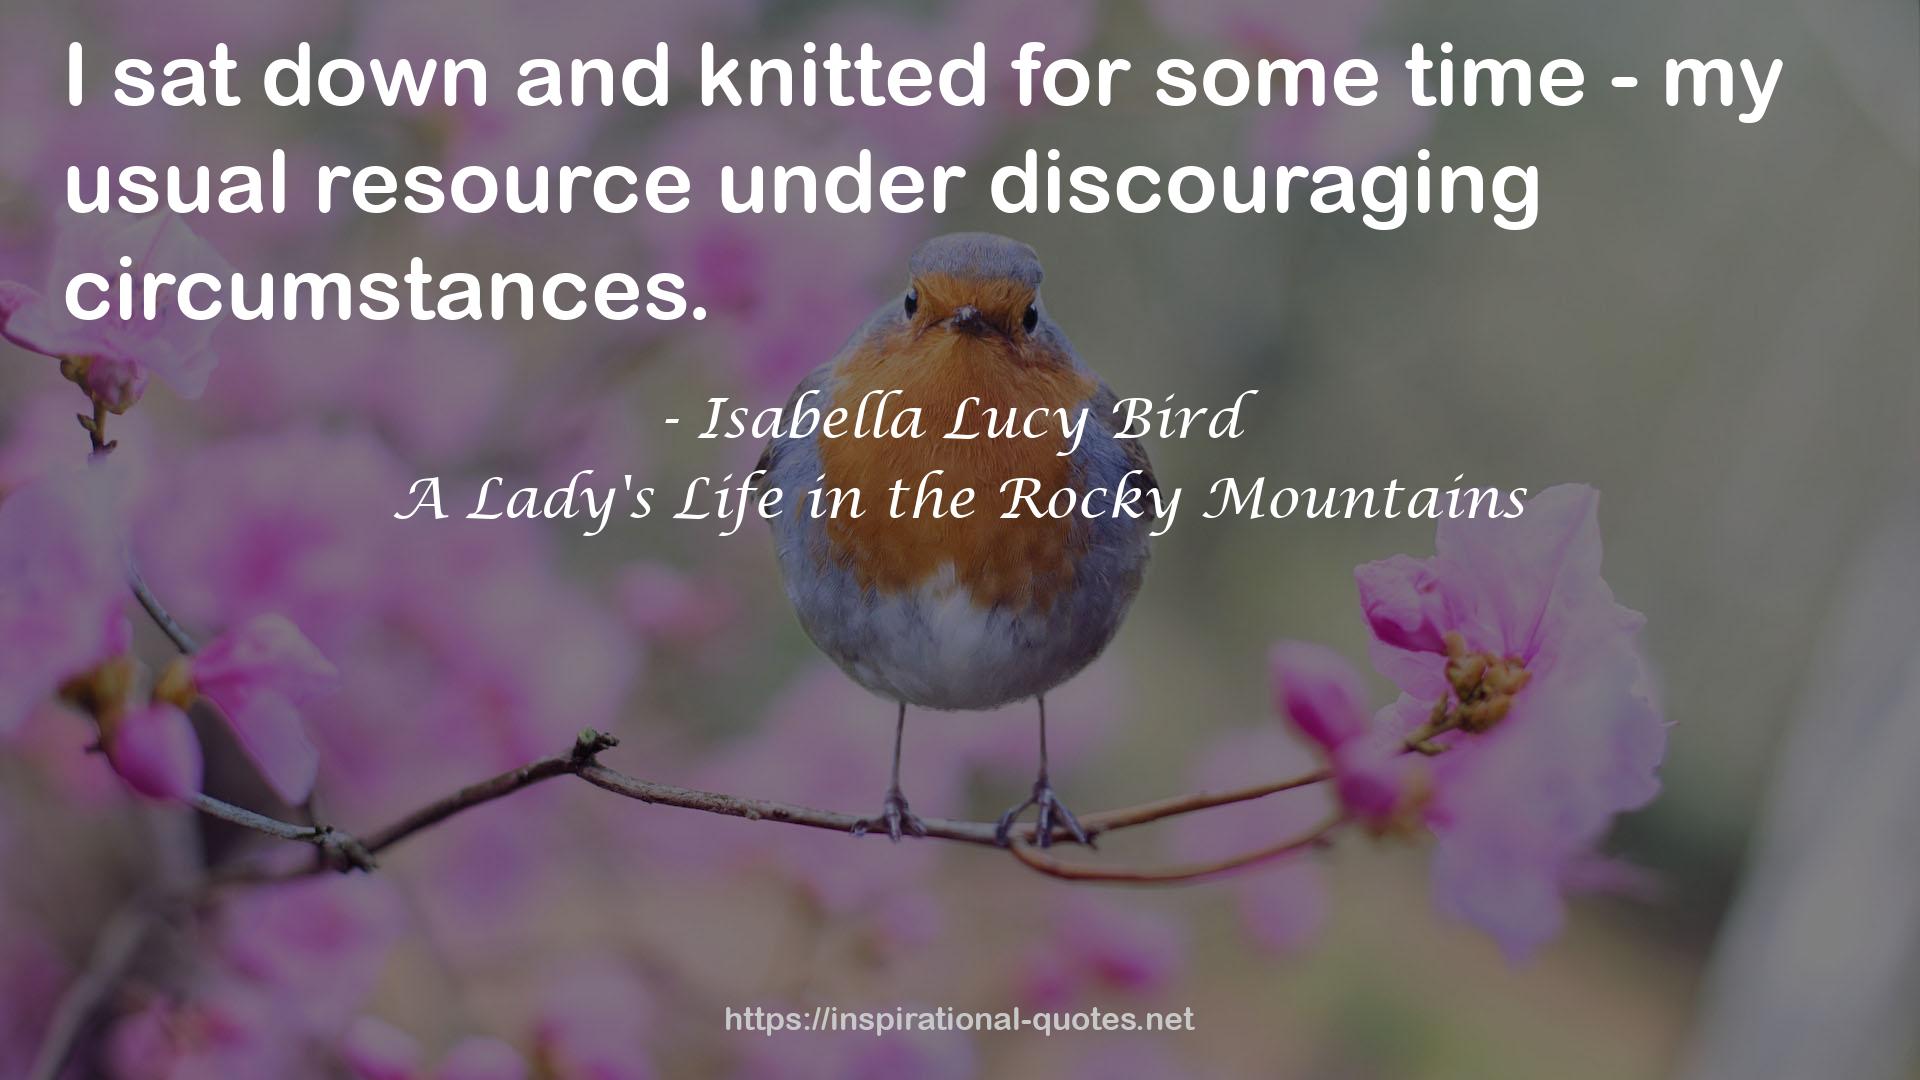 A Lady's Life in the Rocky Mountains QUOTES